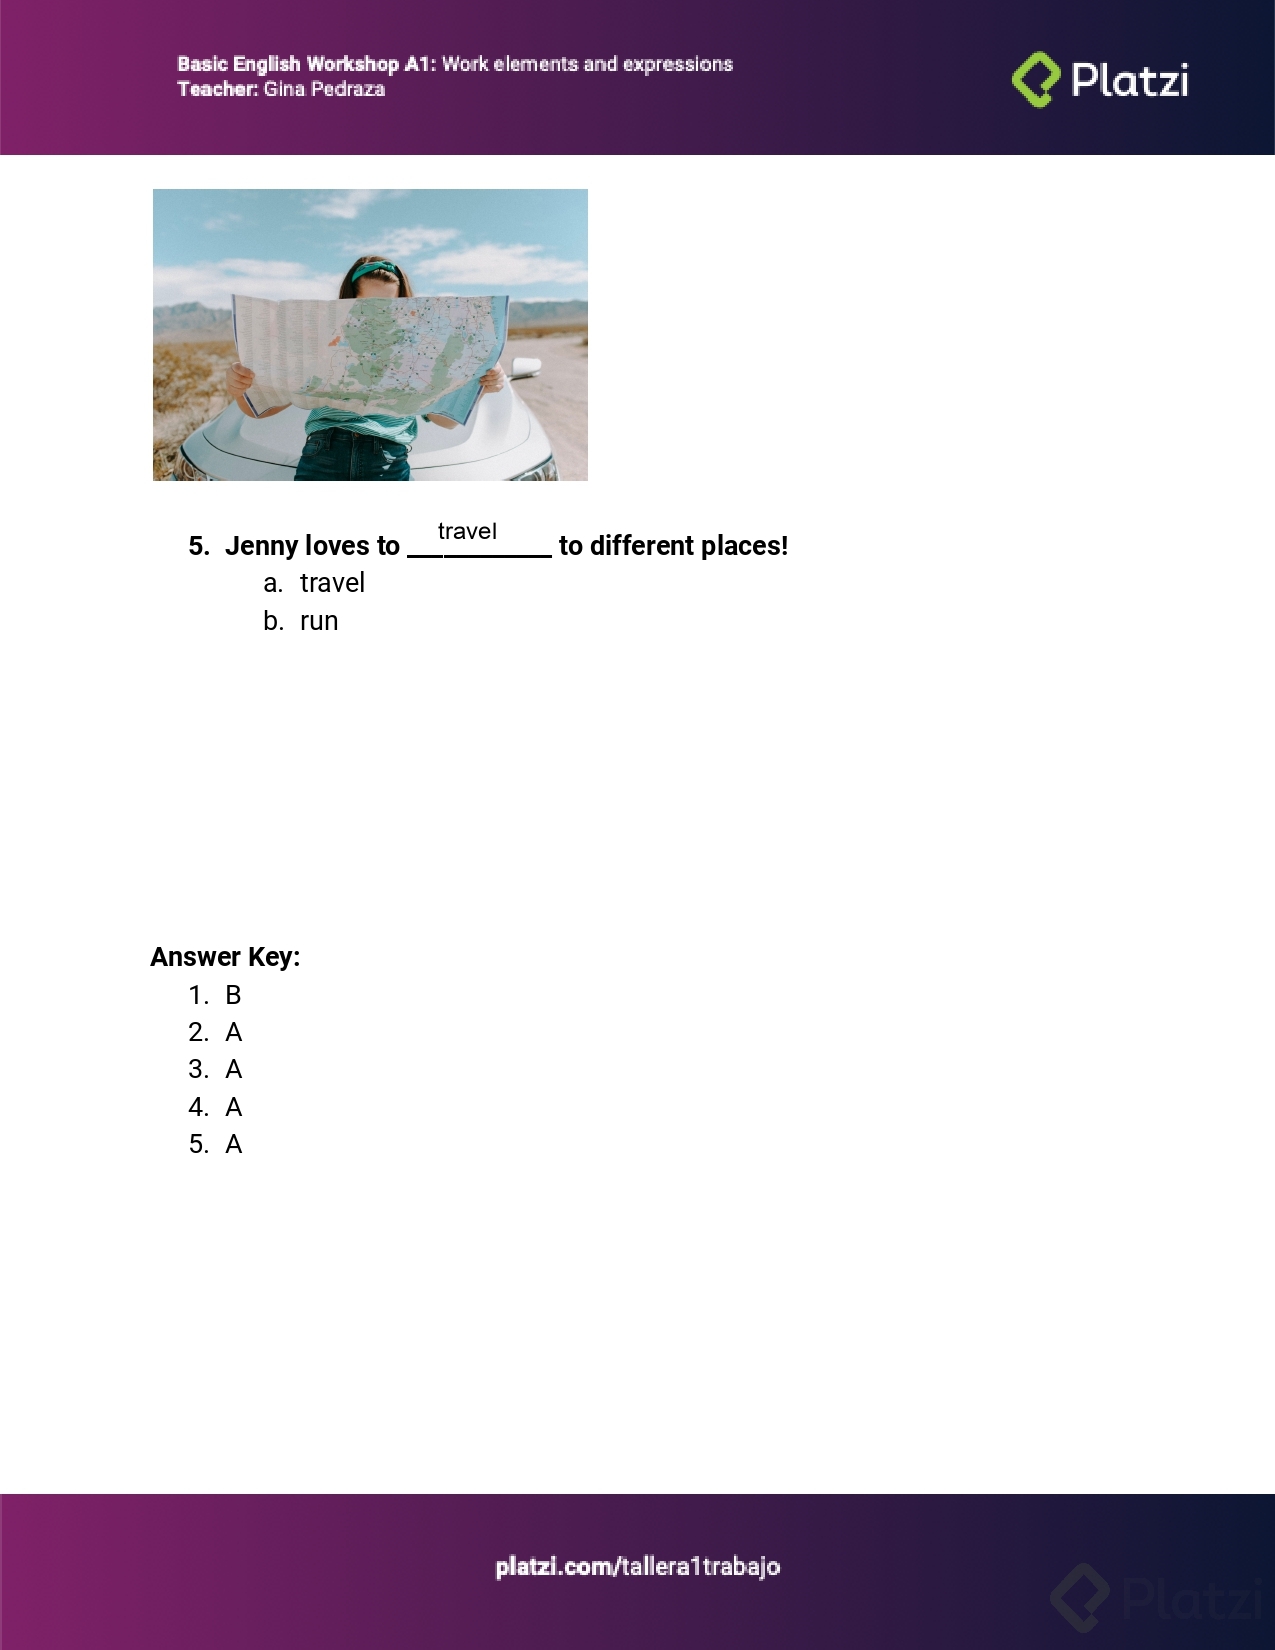 worksheet-class-9-getting-to-know-your-colleagues_8aa8657e-e442-4dad-9fca-624d86281cc5_page-0003.jpg